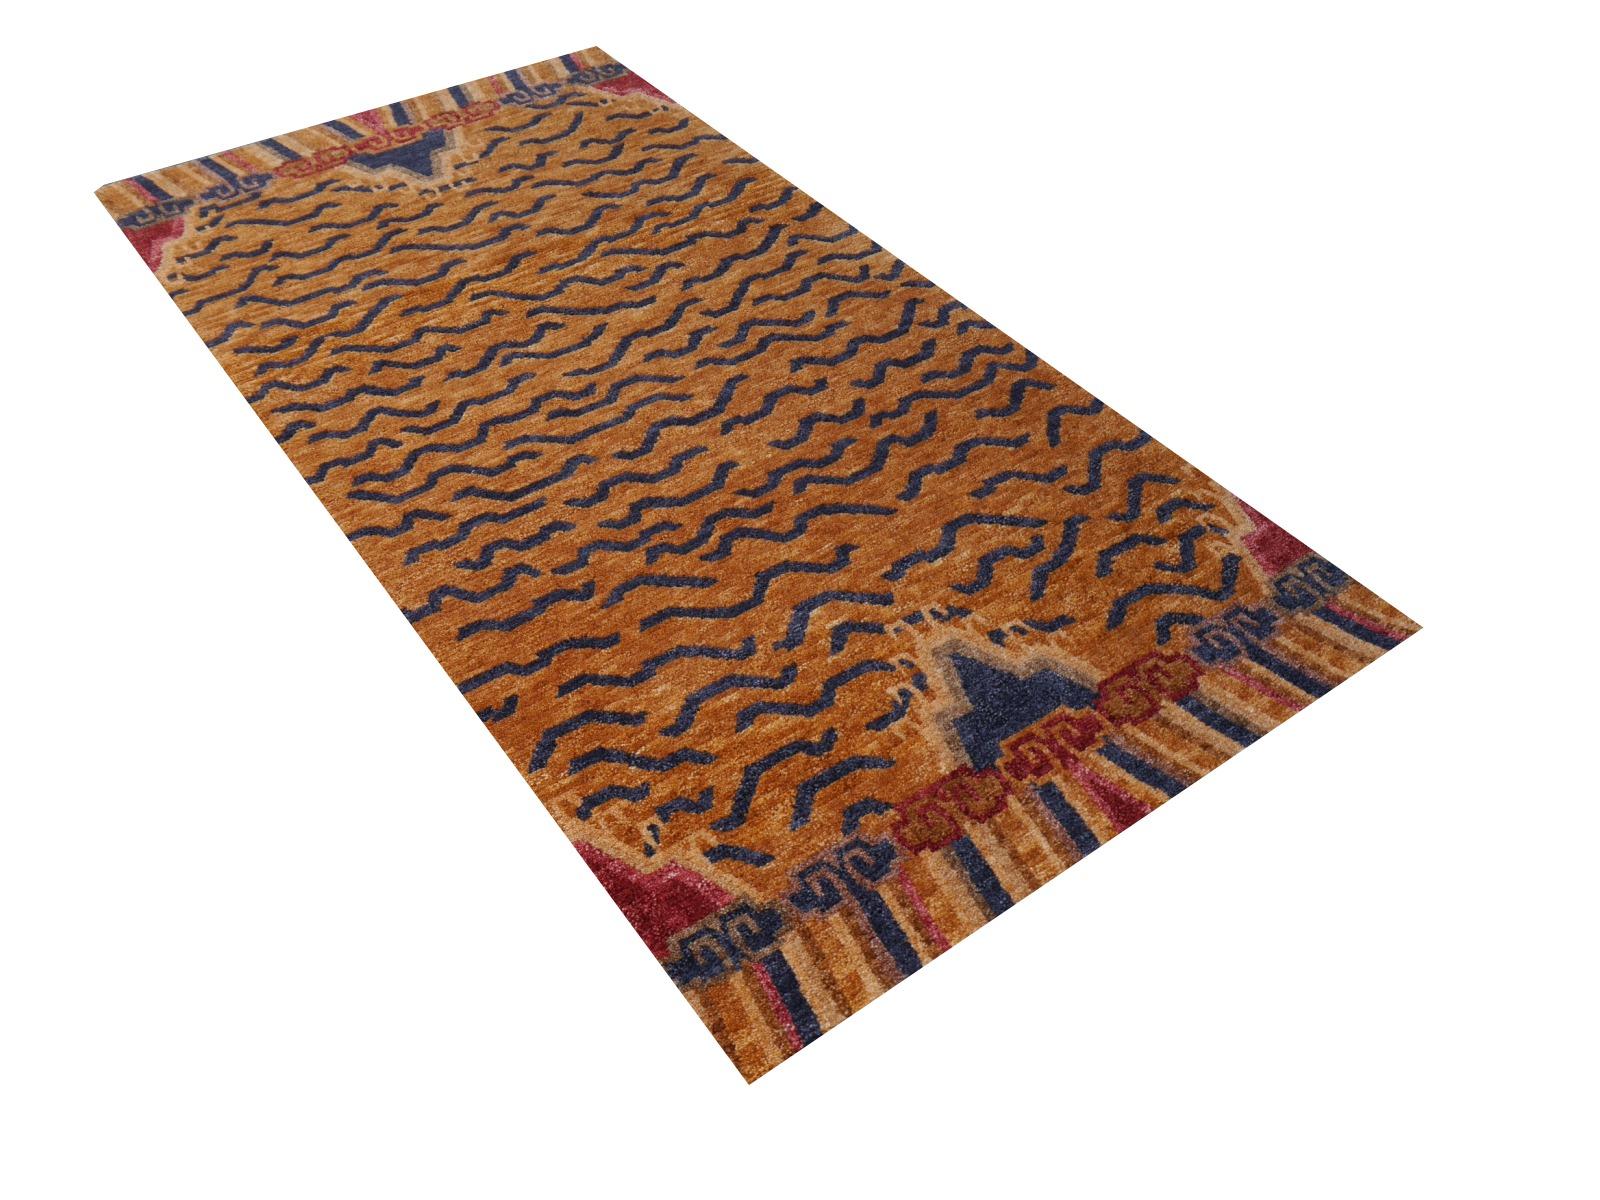 Art Deco Tibetan Tiger Rug Pure Wool Hand Knotted by Djoharian Collection Antique Design